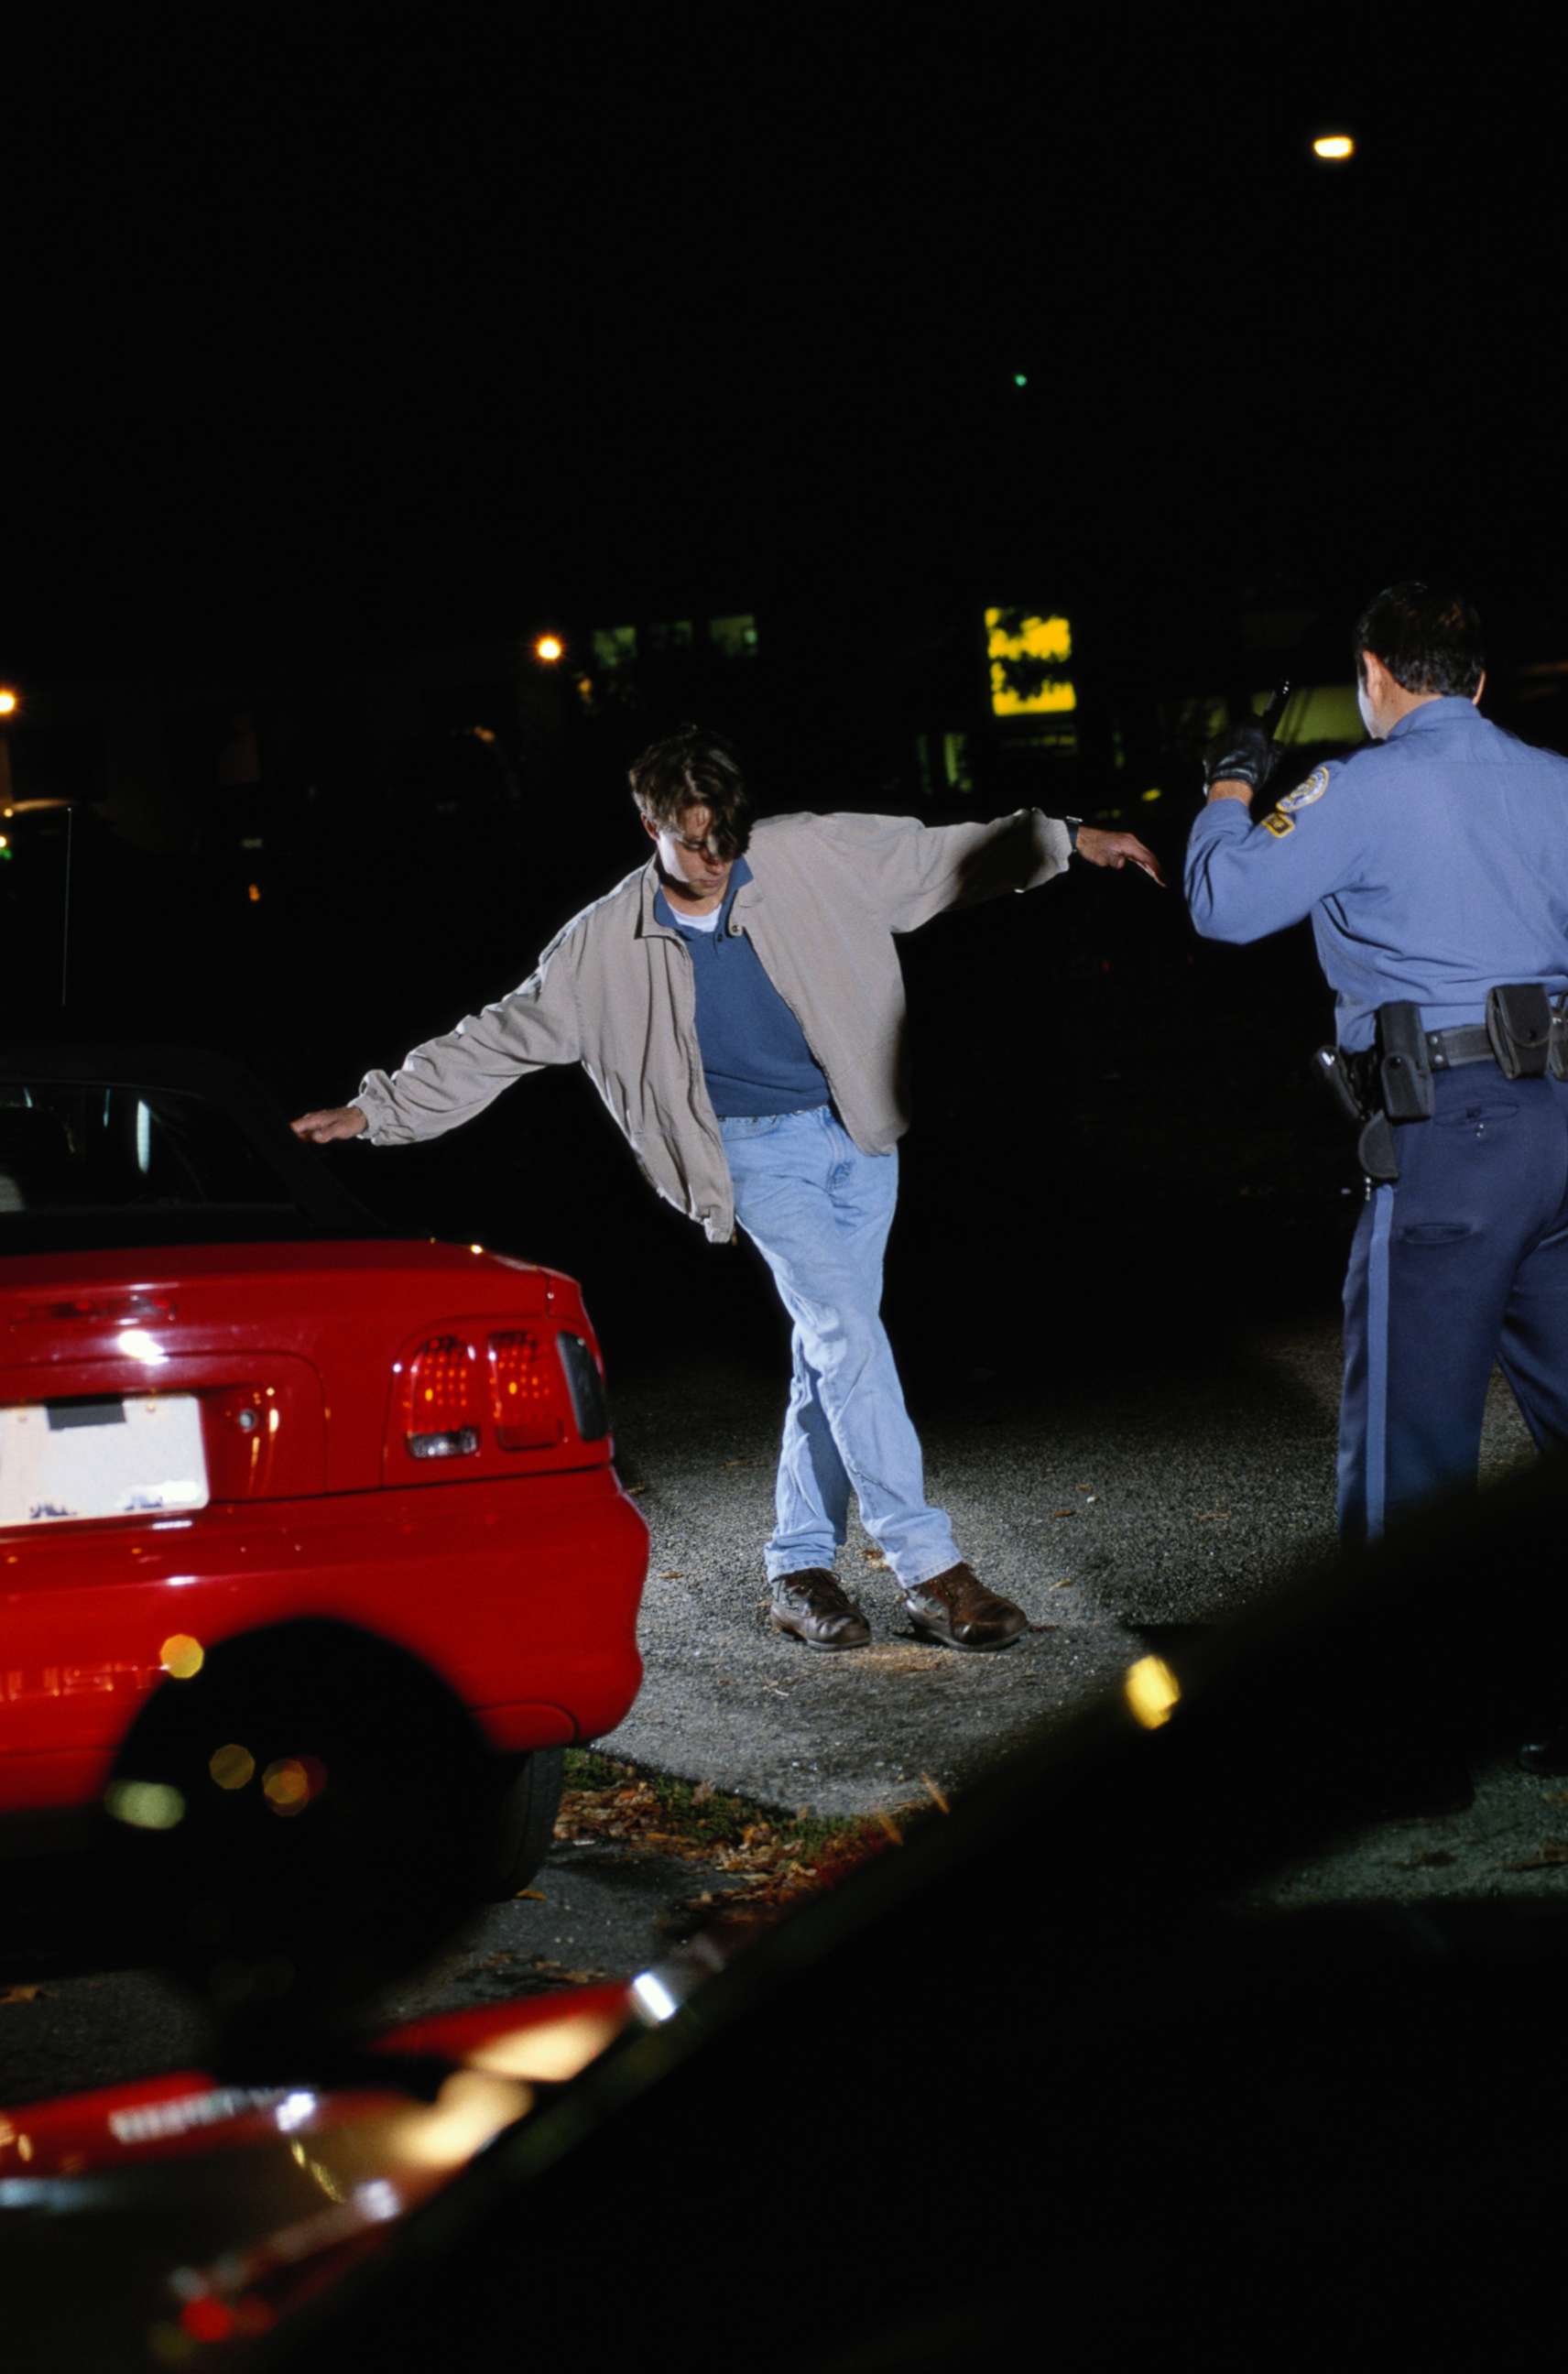 PHOTO: In this undated file photo, a sobriety test is being given.